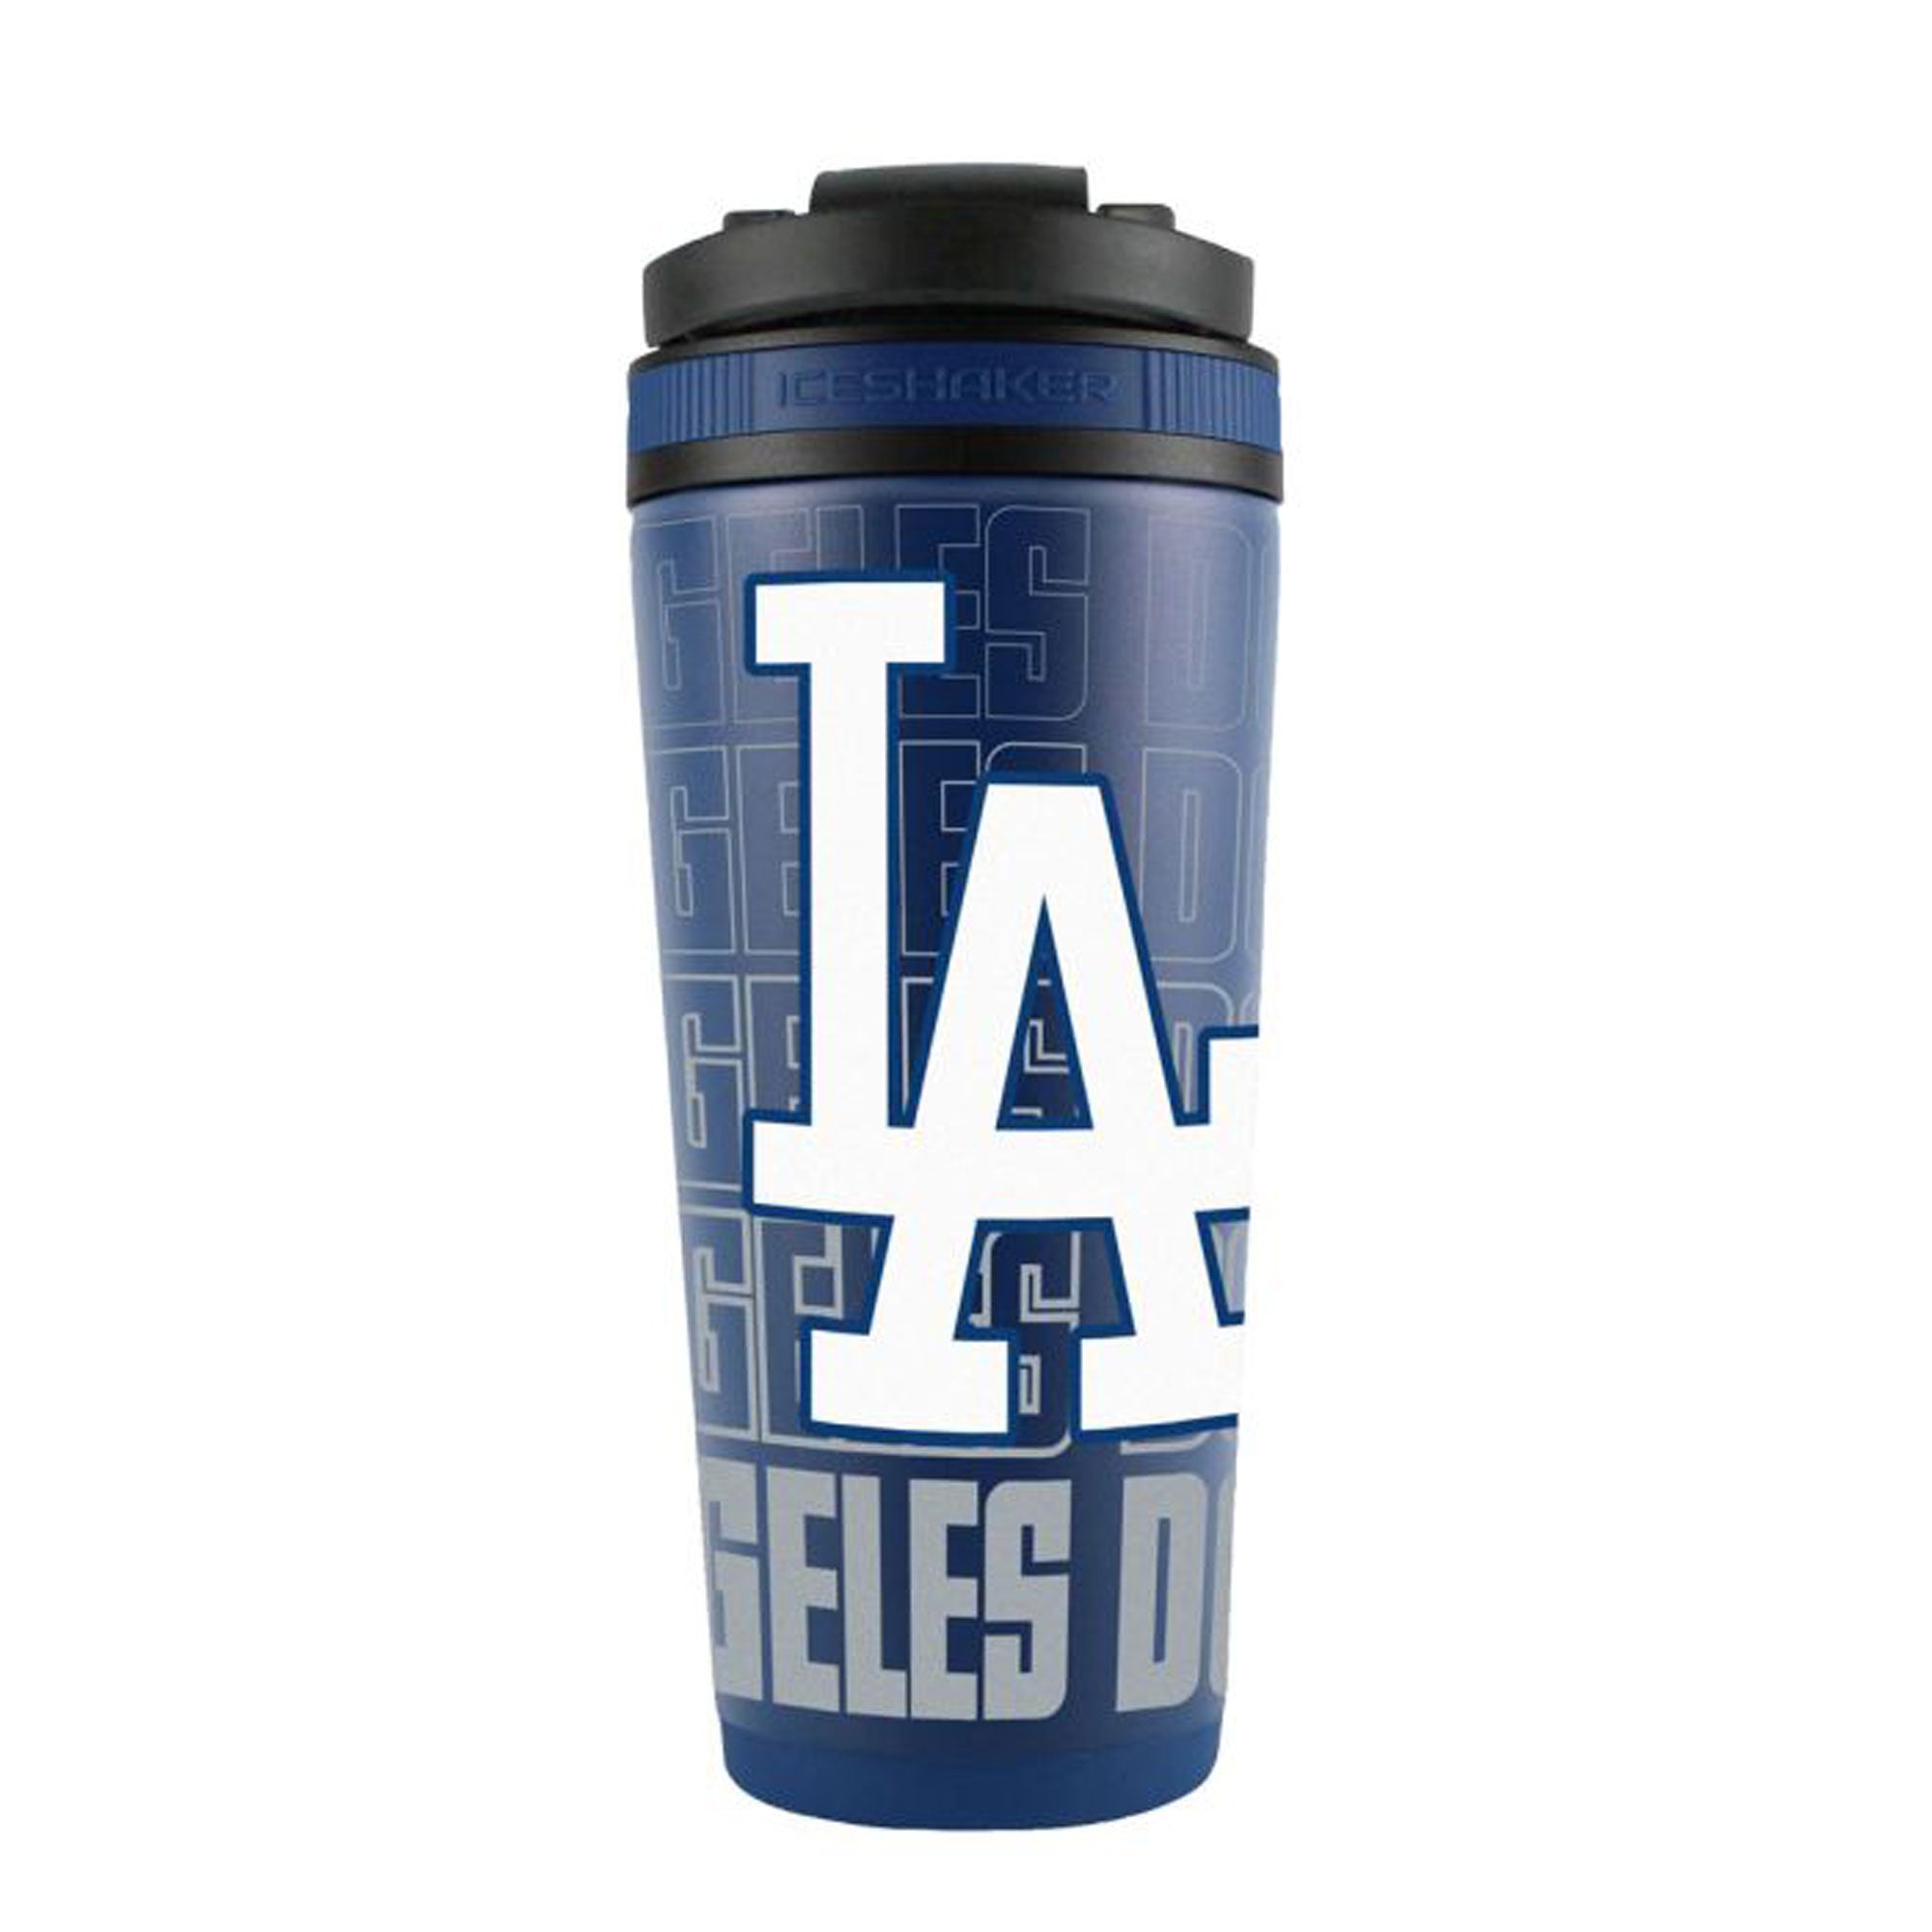 Officially Licensed Los Angeles Dodgers 4D Ice Shaker